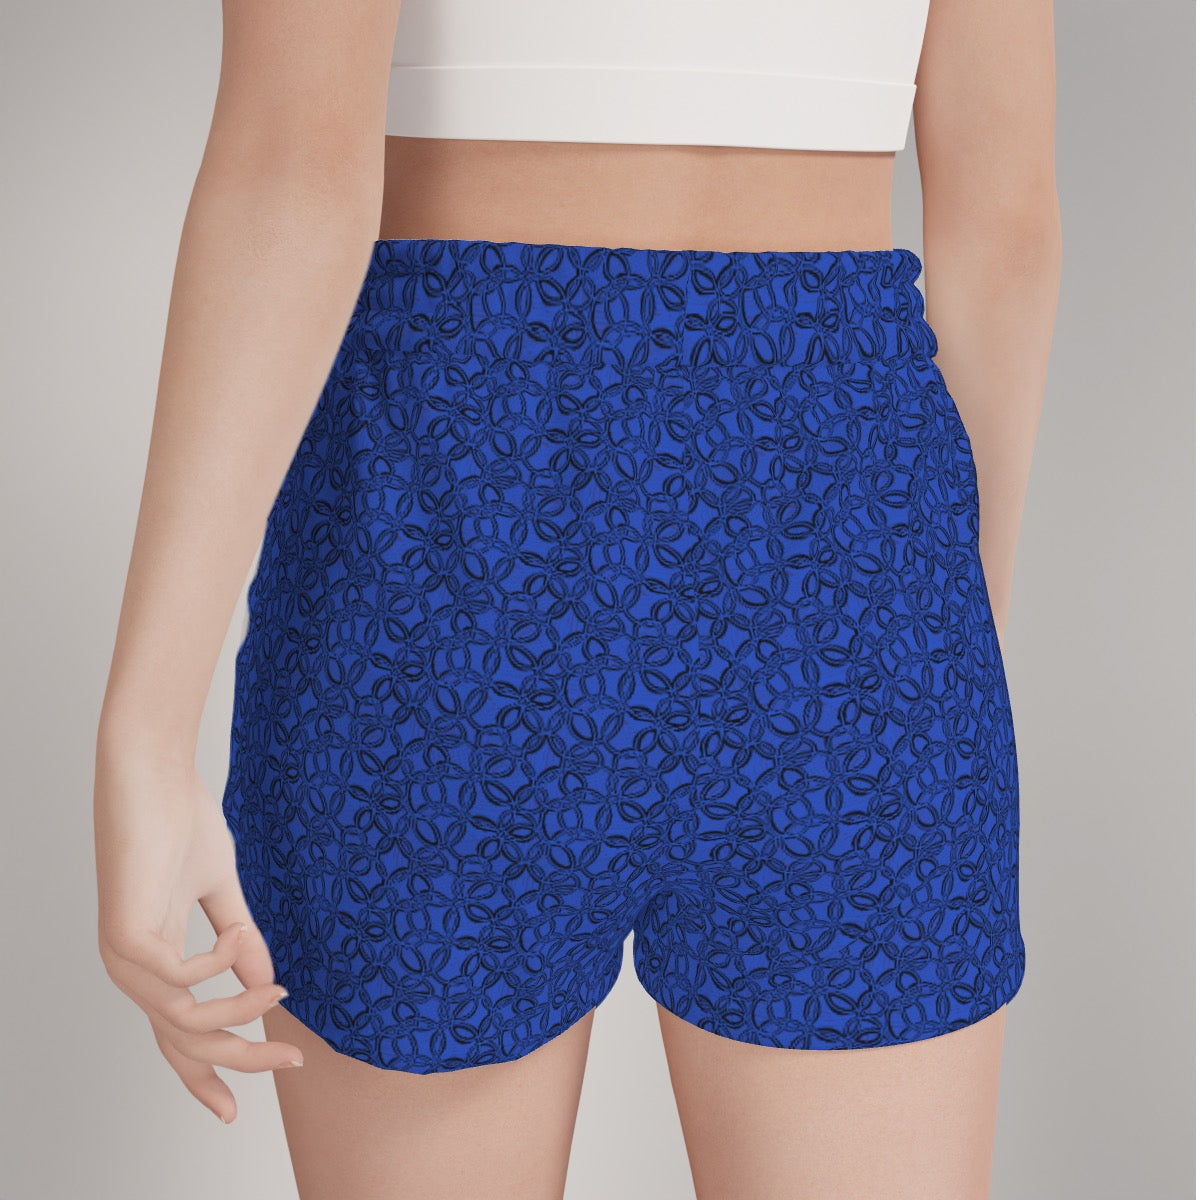 Geometrical Blue / Black Women's Casual Shorts. Pattern hand-painted by the Designer Maria Alejandra Echenique